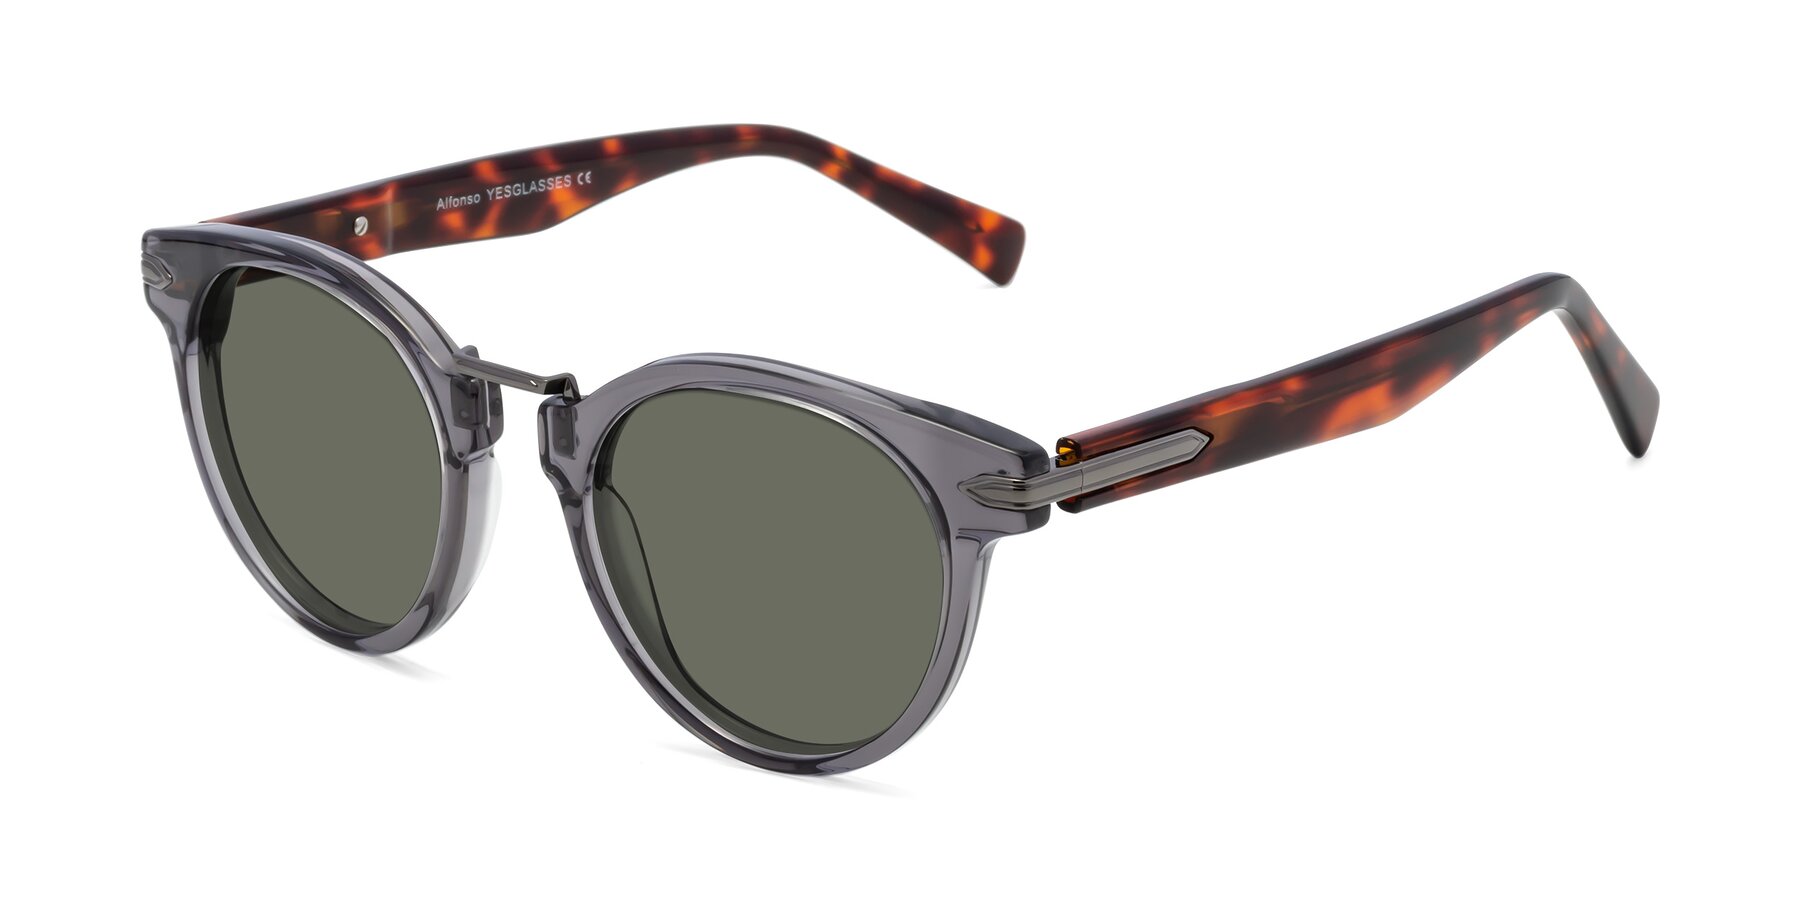 Angle of Alfonso in Gray /Tortoise with Gray Polarized Lenses